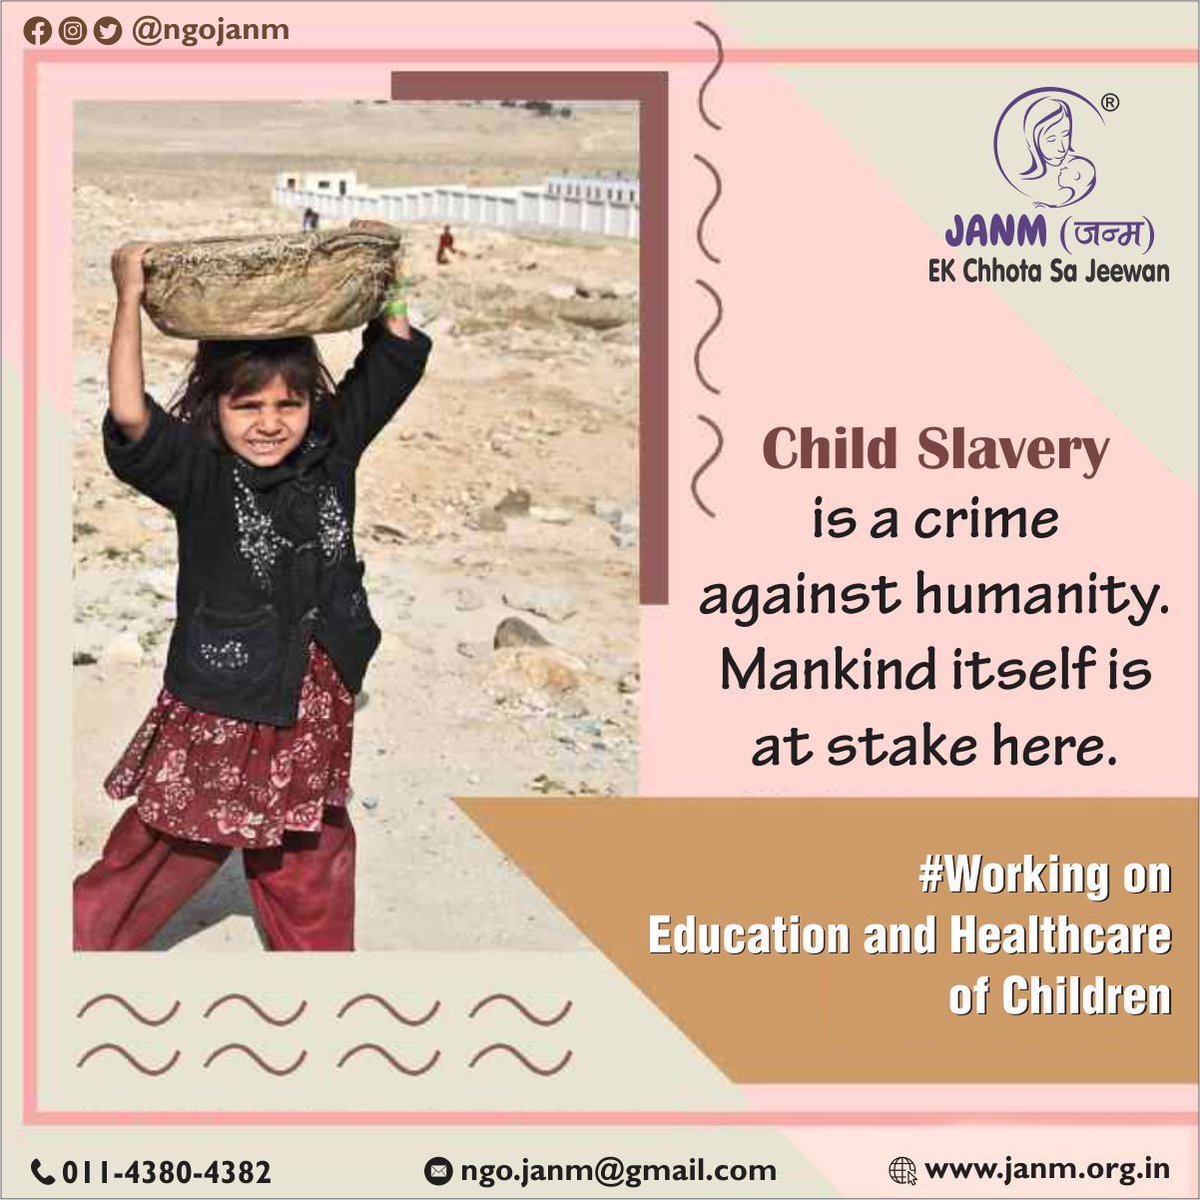 'Child Slavery is a crime against humanity. Mankind itself is at stake here.'

Working on Education and Healthcare of Children.

#ngo #children #RightToEducation #stopchildlabour #freedom #learning #growth #betterfuture #successmindset #Janm #india